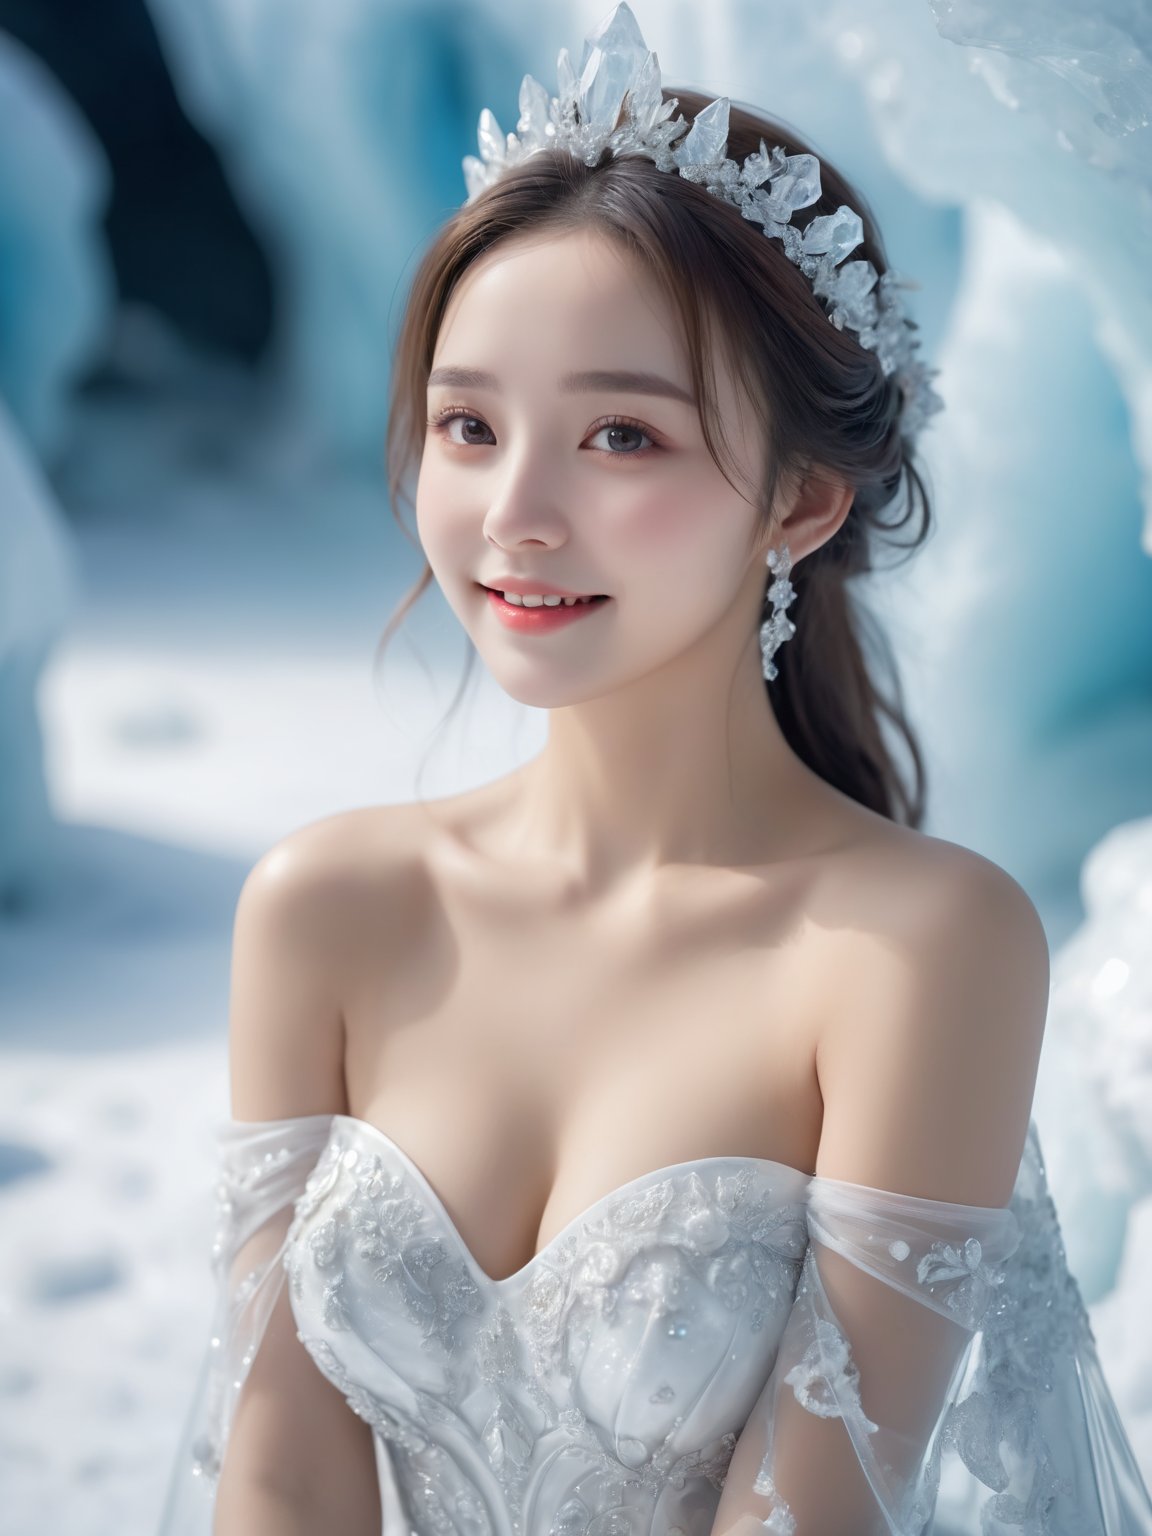 facial close-up composition,1girl,look at view,happy,ice cave,beautiful facial features,real skin,white folding wedding dress,exquisite decoration,level depth of field,bare shoulder,huge skirt,reflection,everywhere ice cubes,